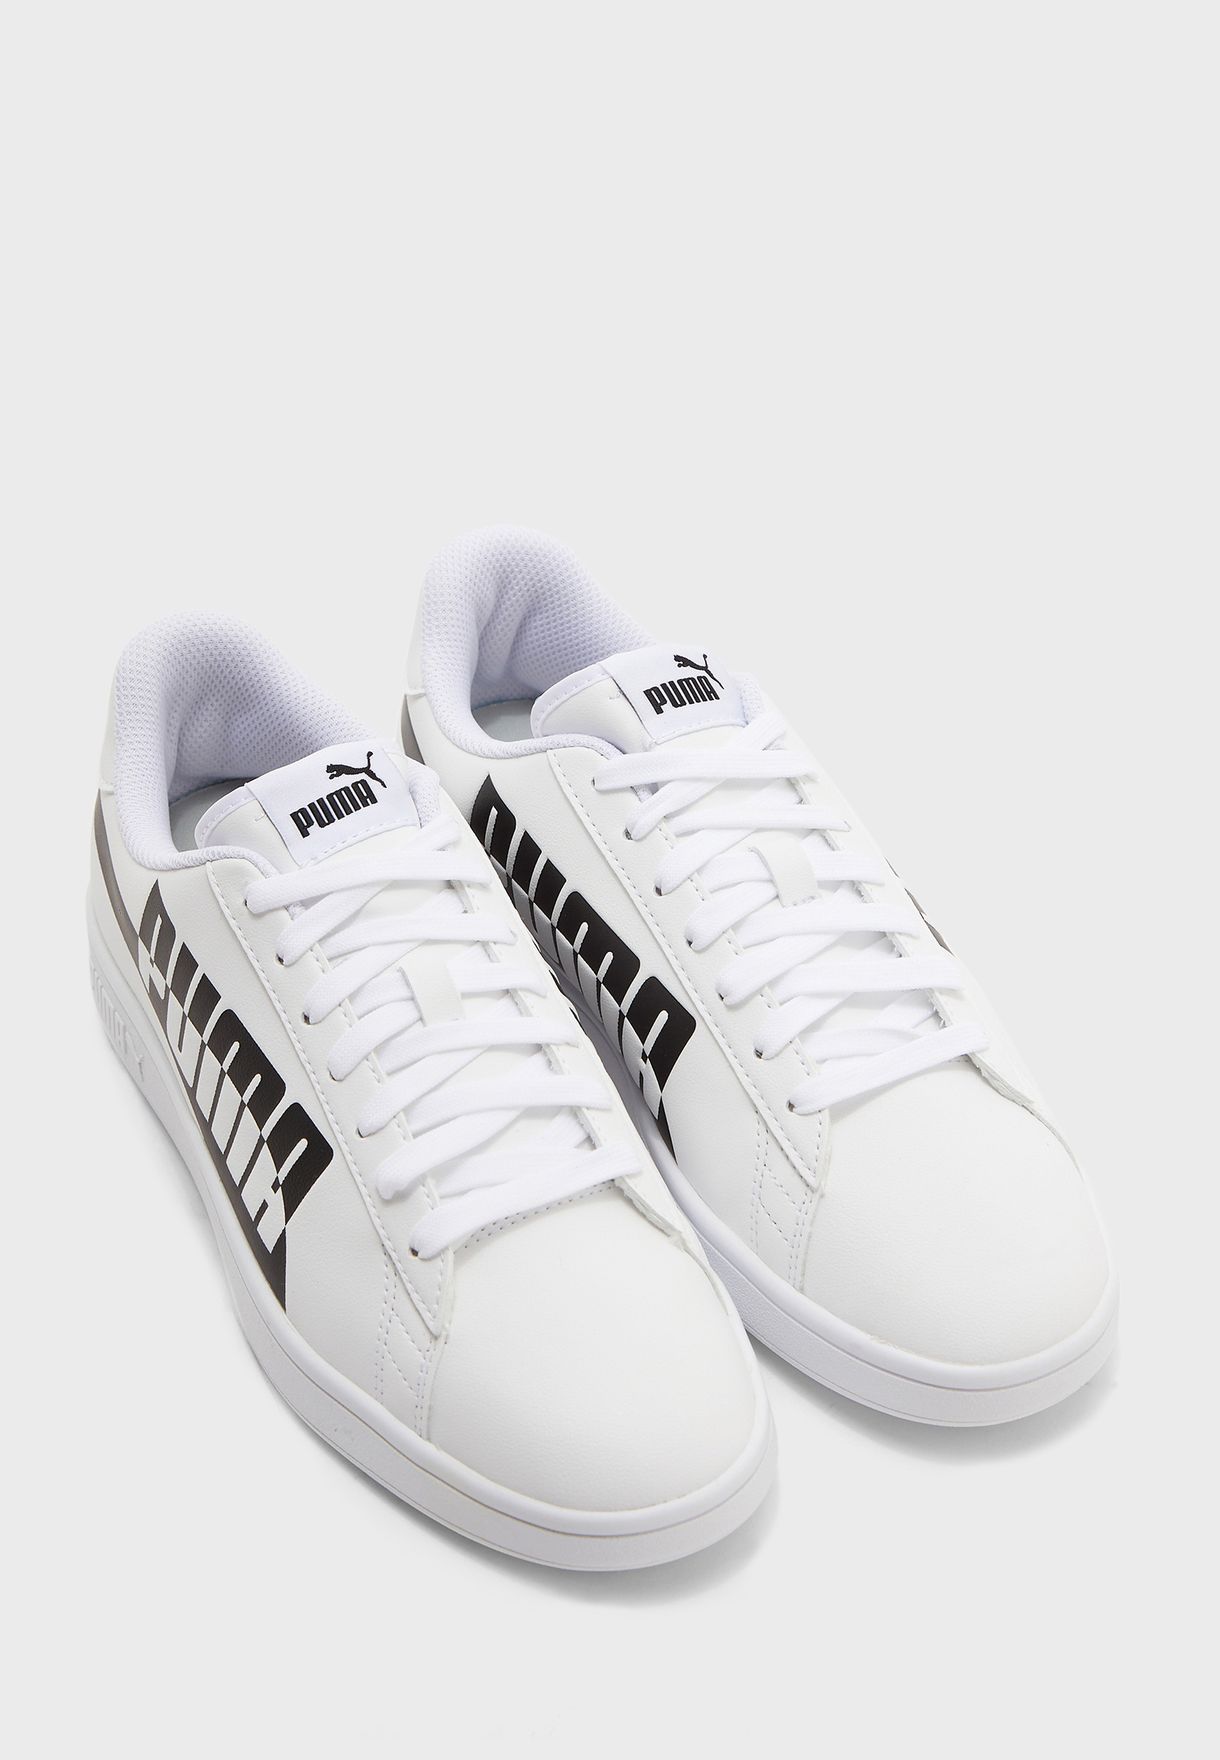 max white sneakers